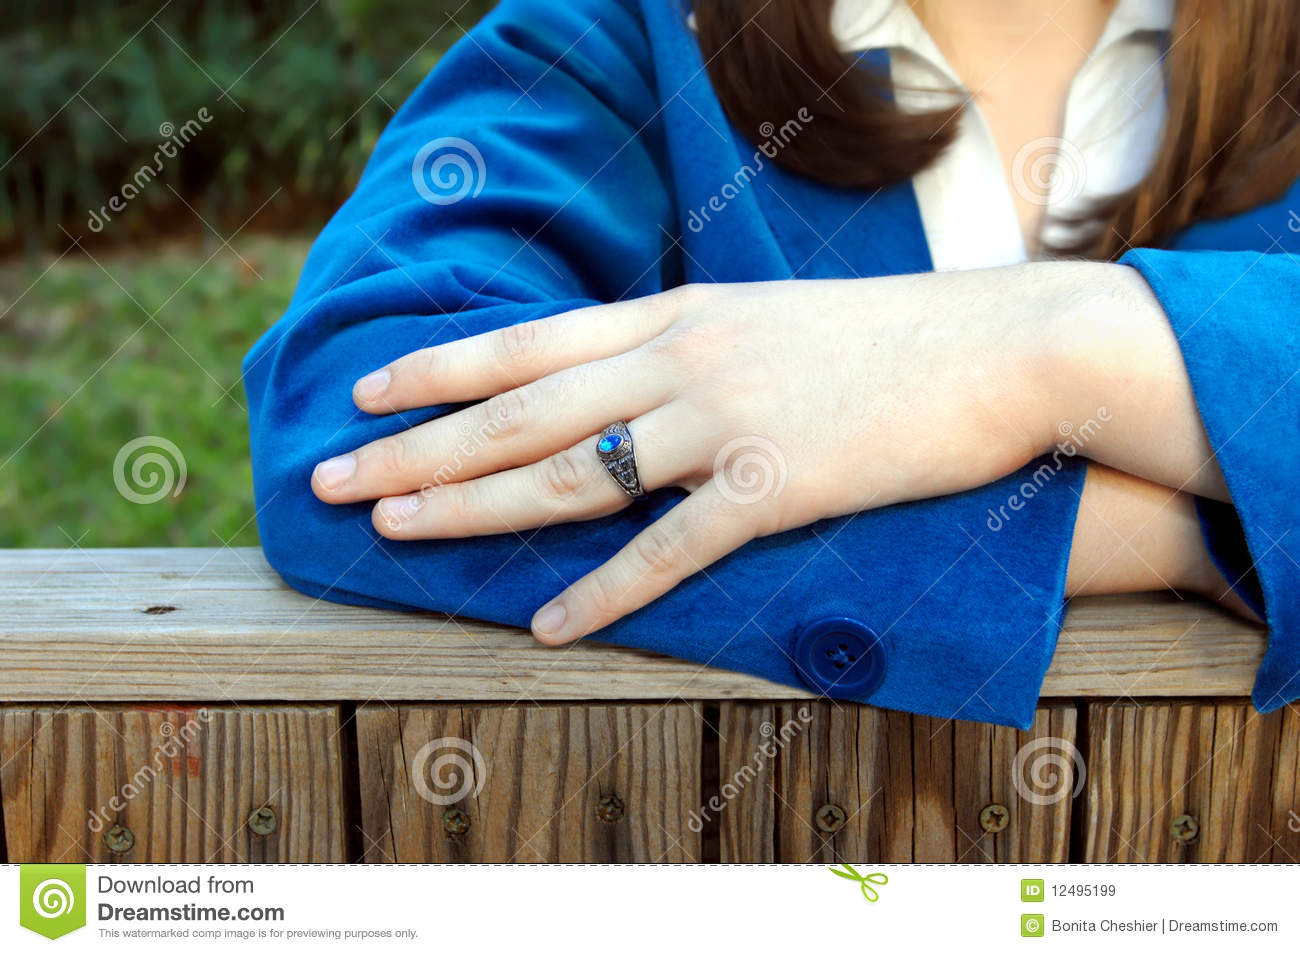 Is Bright Blue And Accents The Aqua Marine Stone In Her Senior Ring